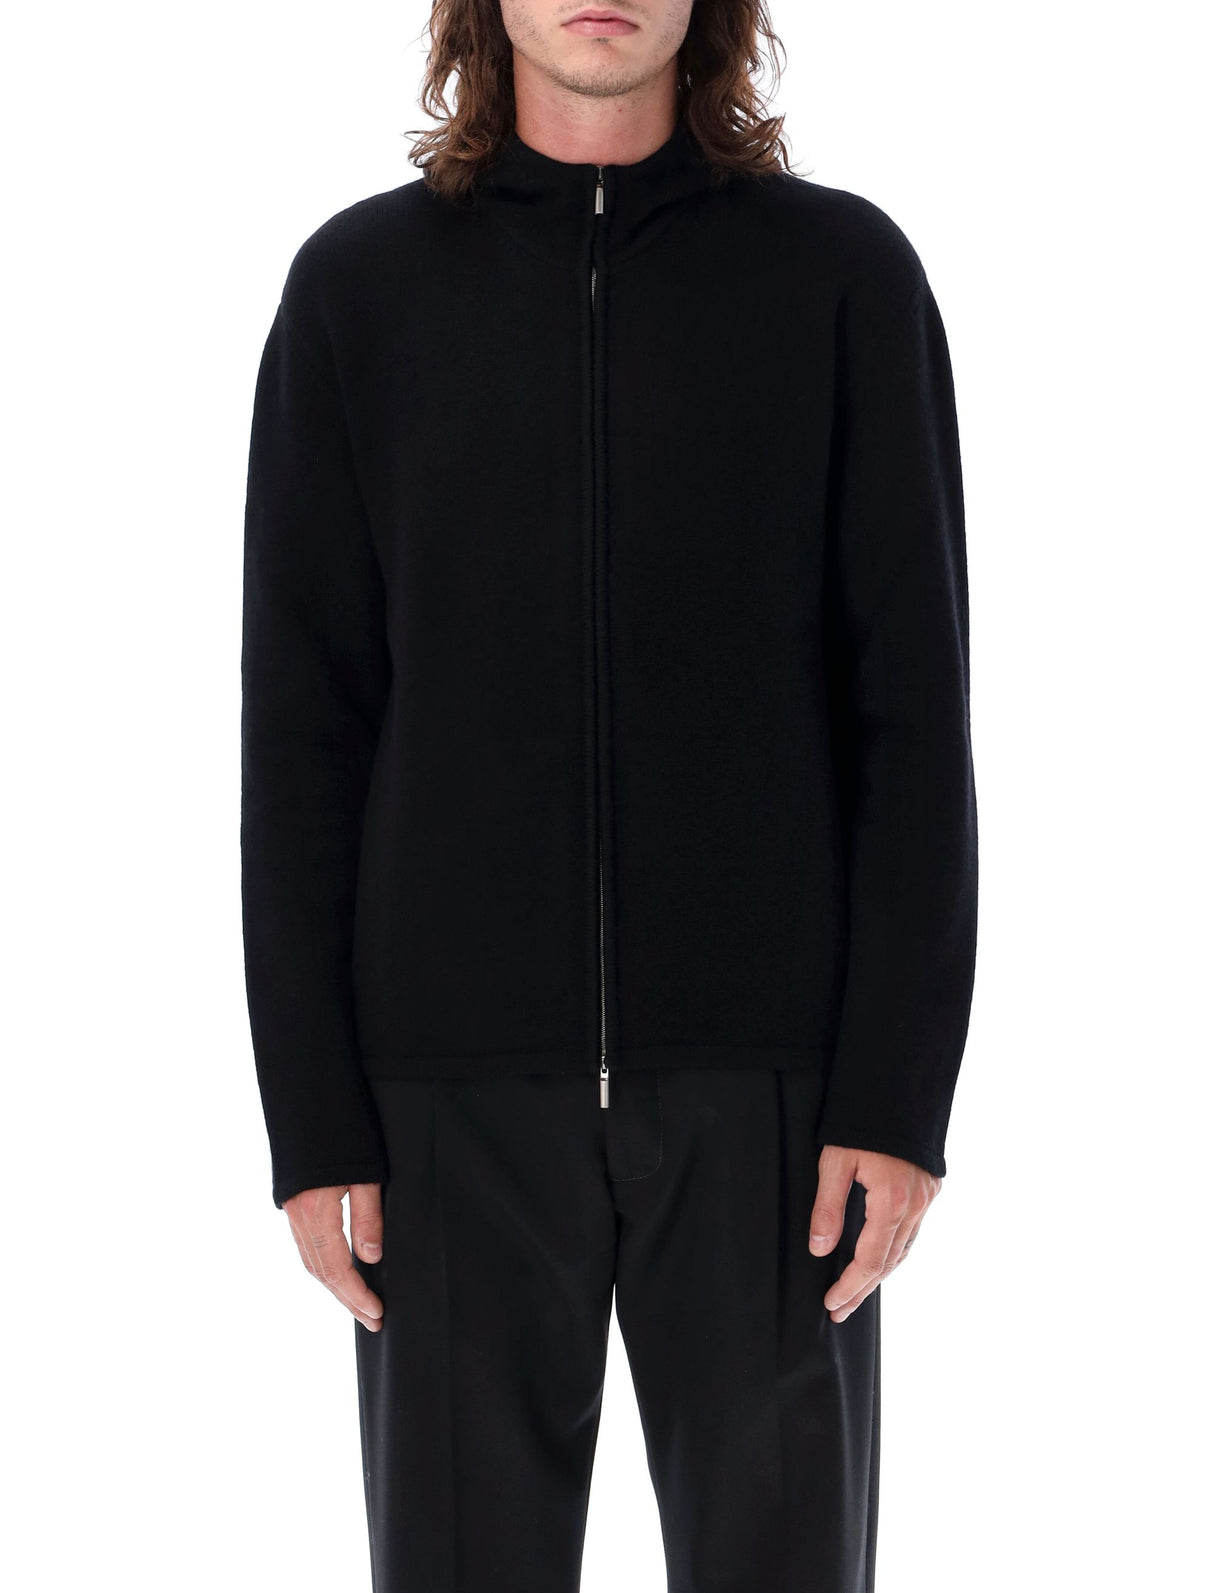 Luxuriously Stylish Cashmere Zip Hoodie for Men